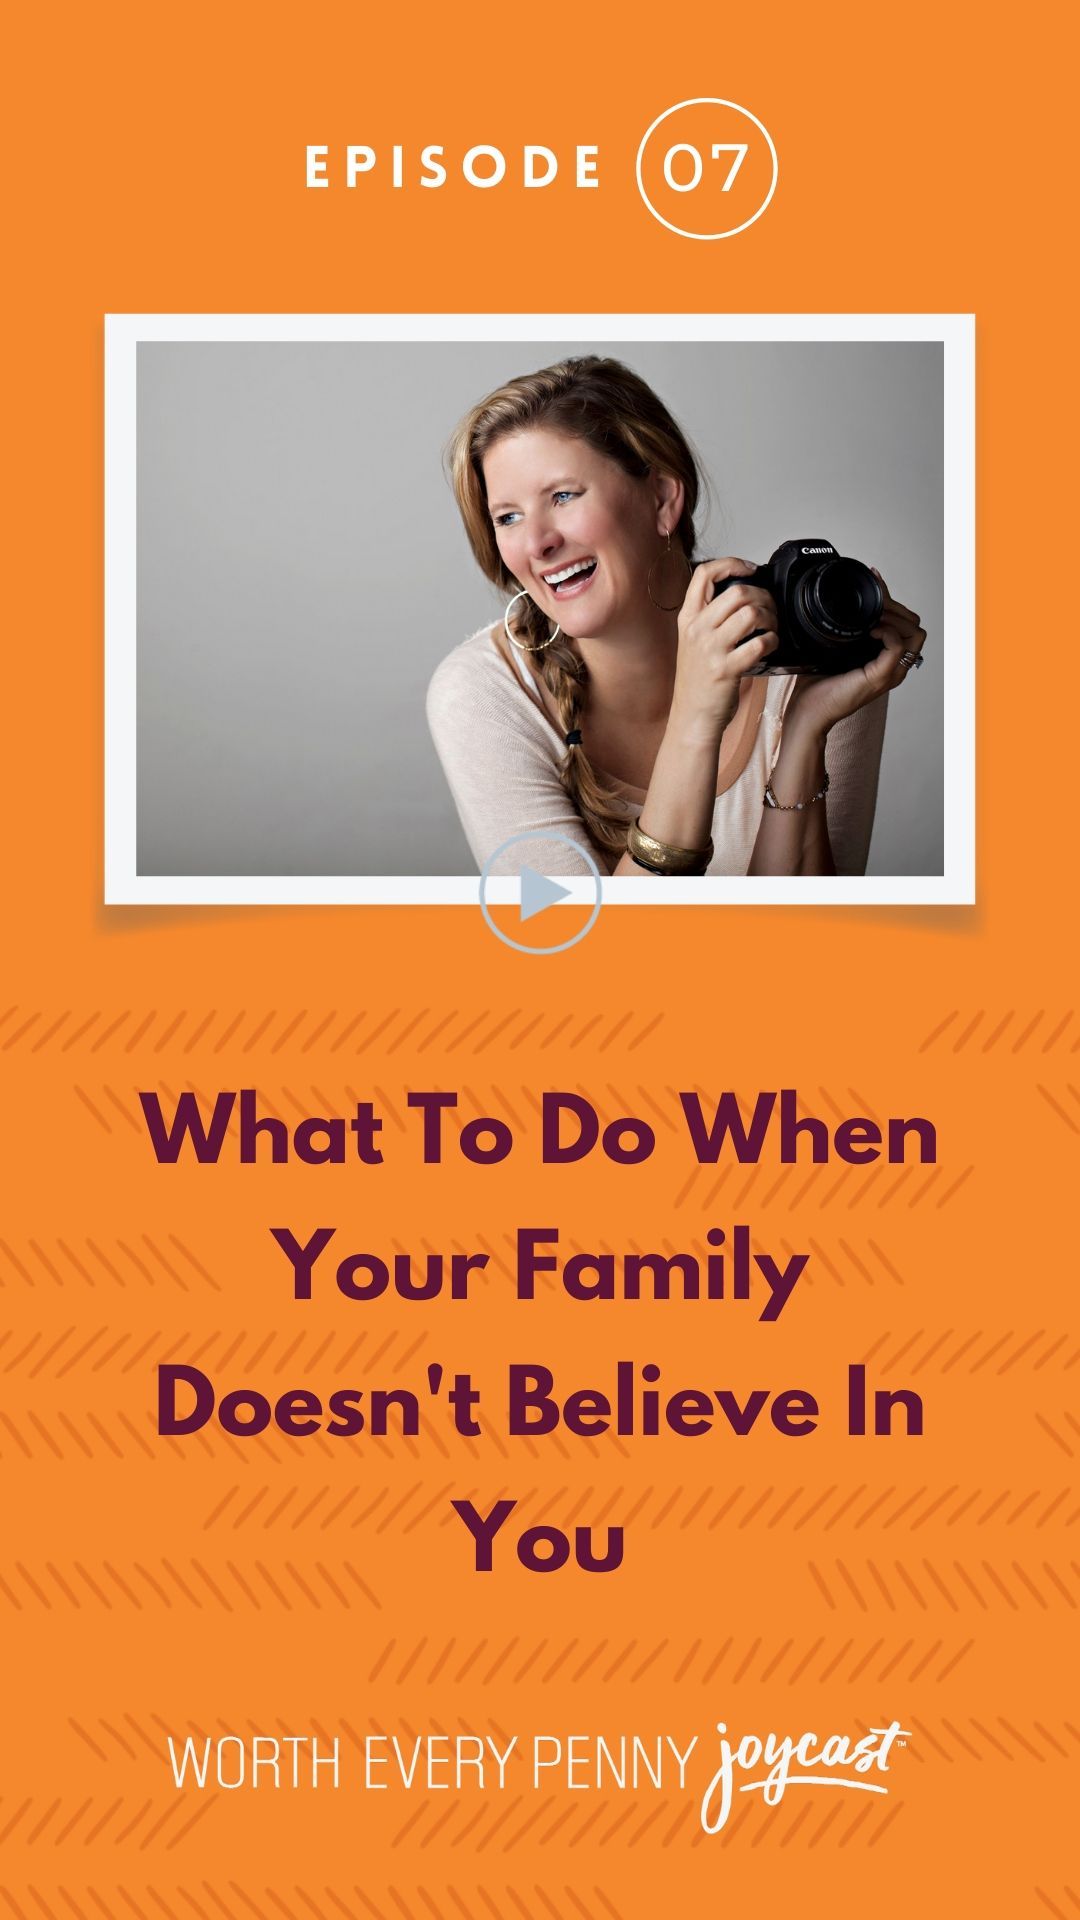 Episode 7: What to Do When Your Family Doesn't Believe In You